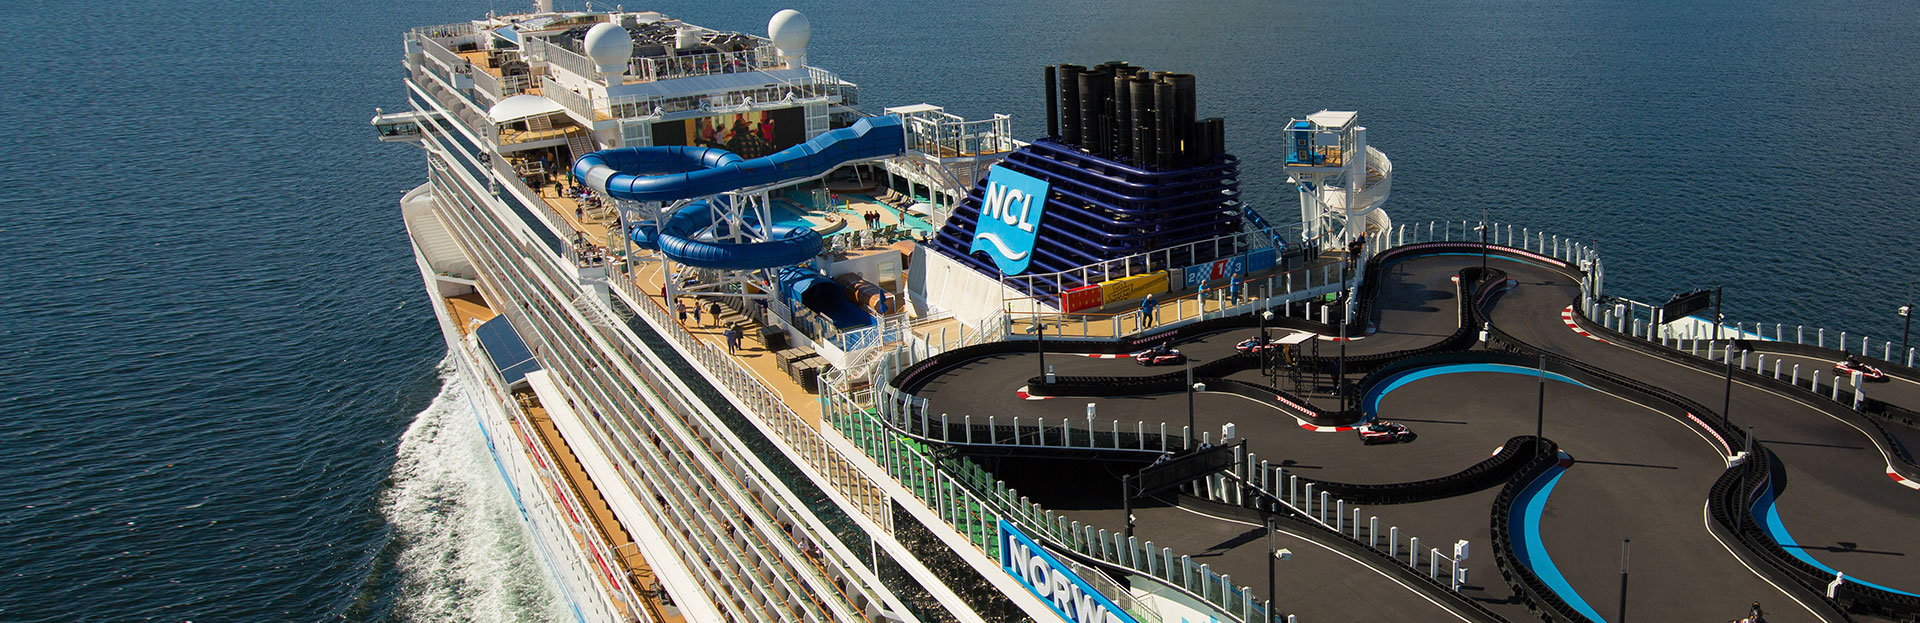 cruise deals with flights from toronto